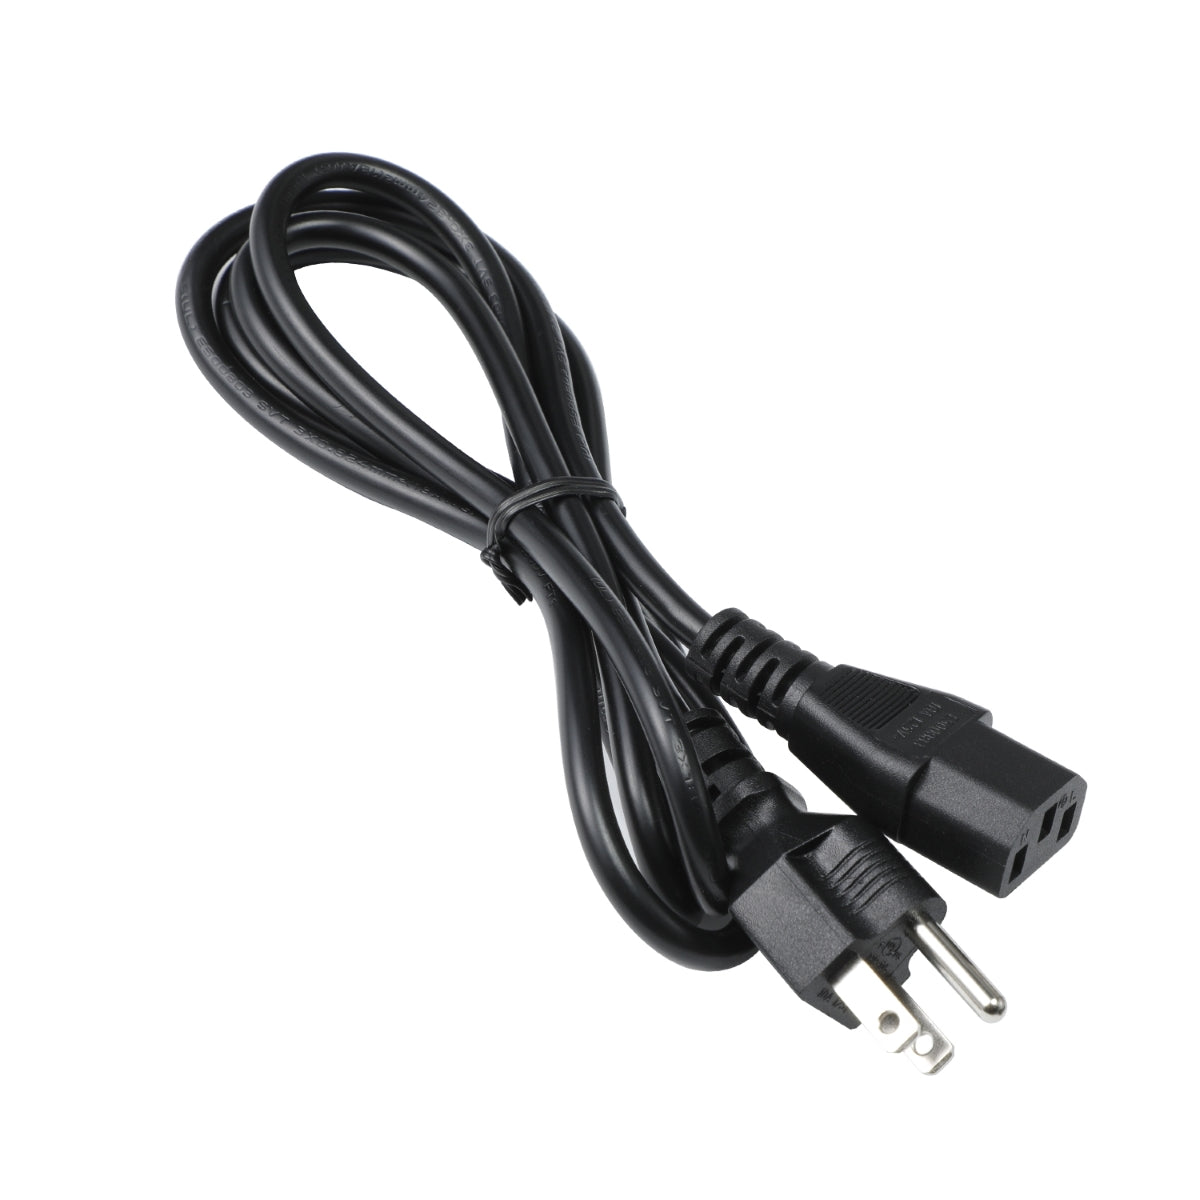 Power Cord for Dell SE2216H Monitor